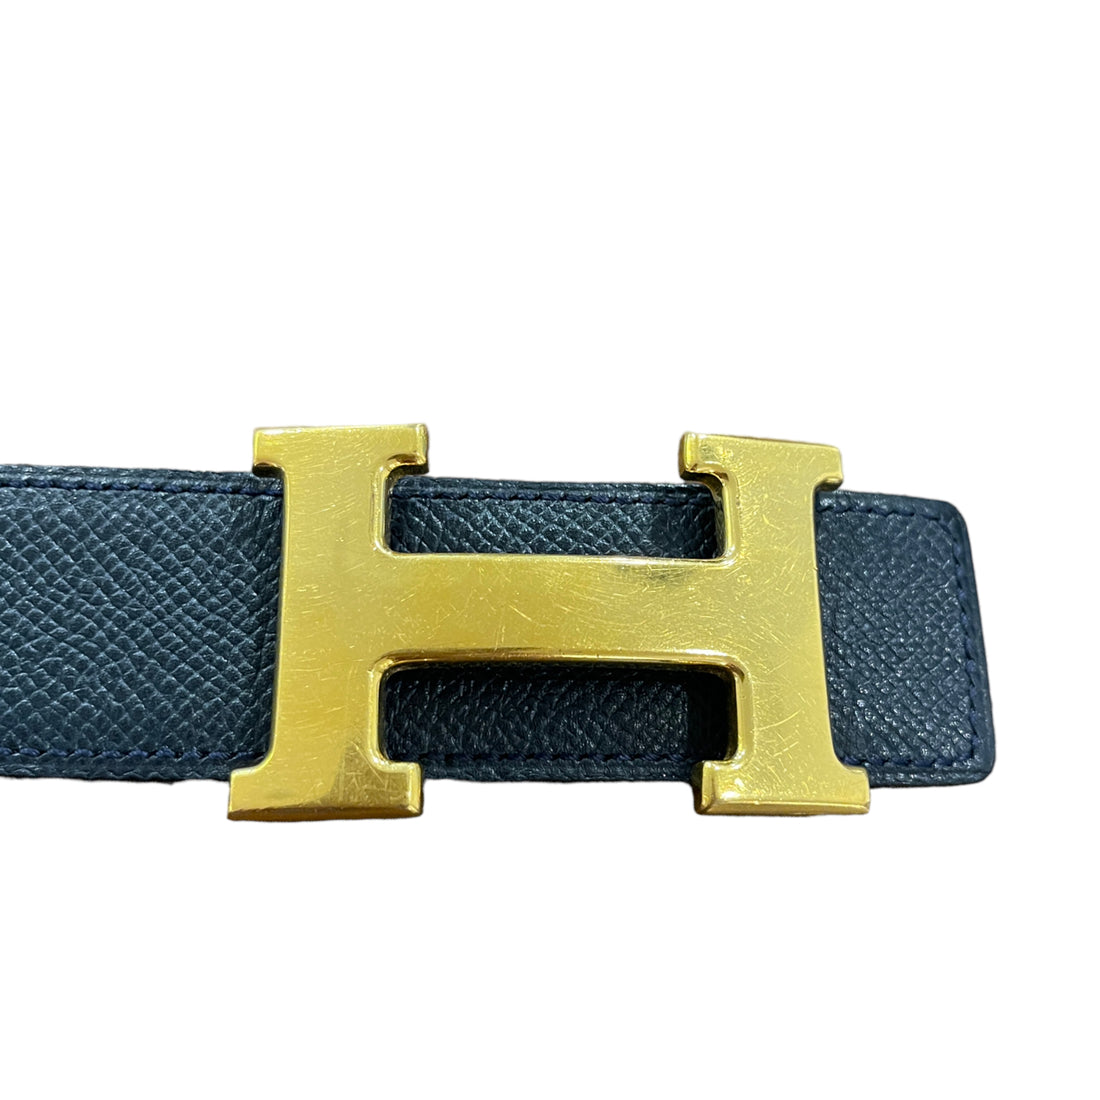 Hermès reversible belt "H" with golden buckle (significant signs of wear)